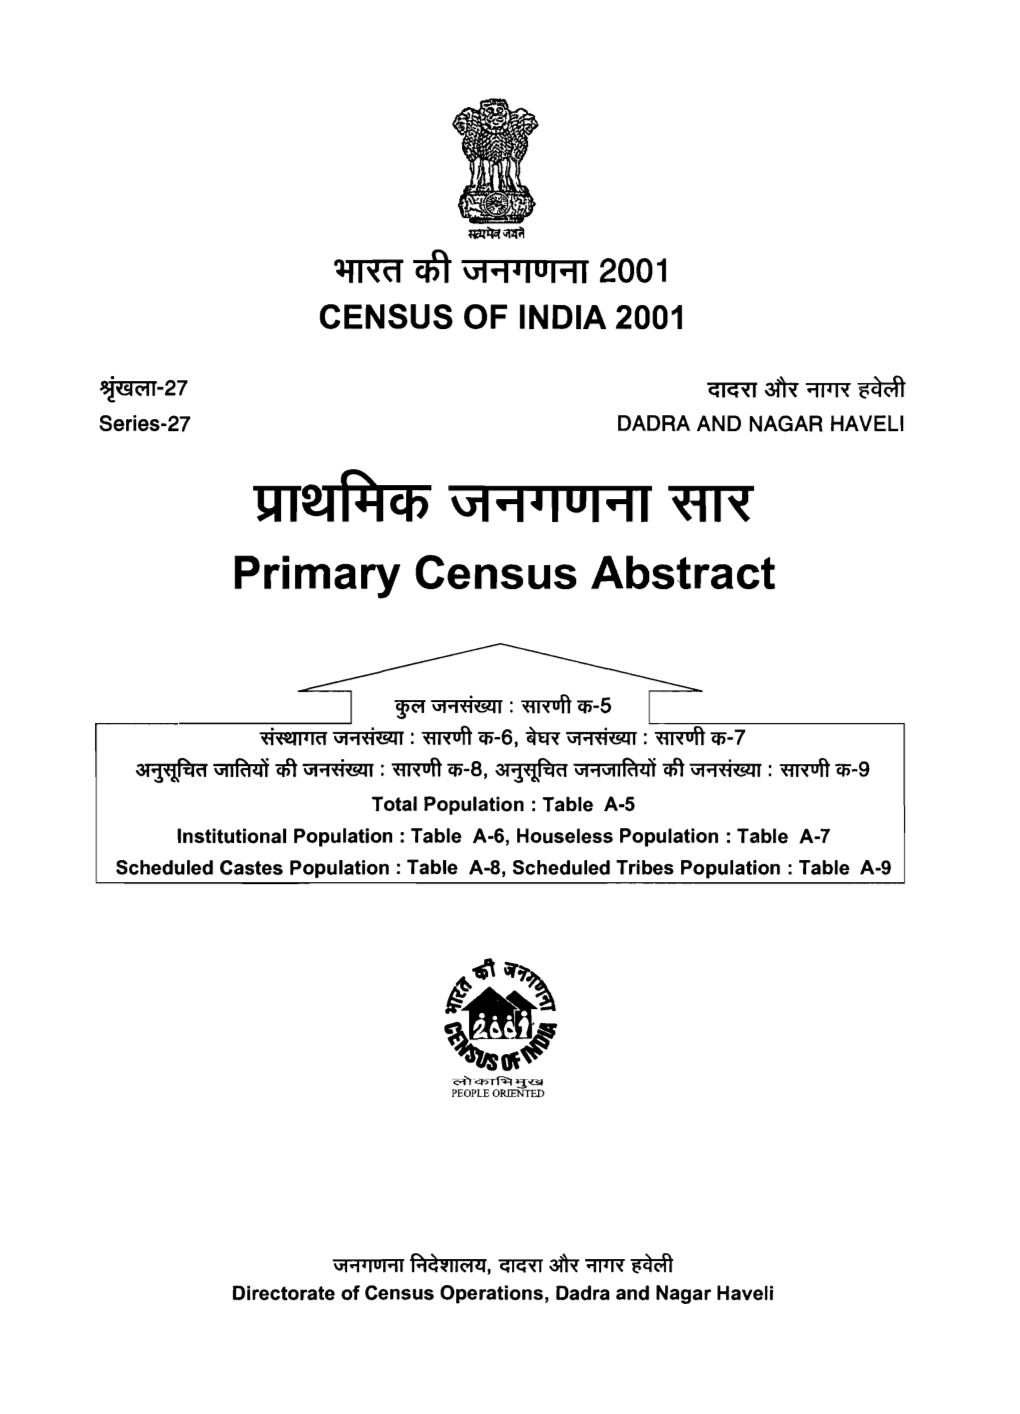 Primary Census Abstract, Series-27